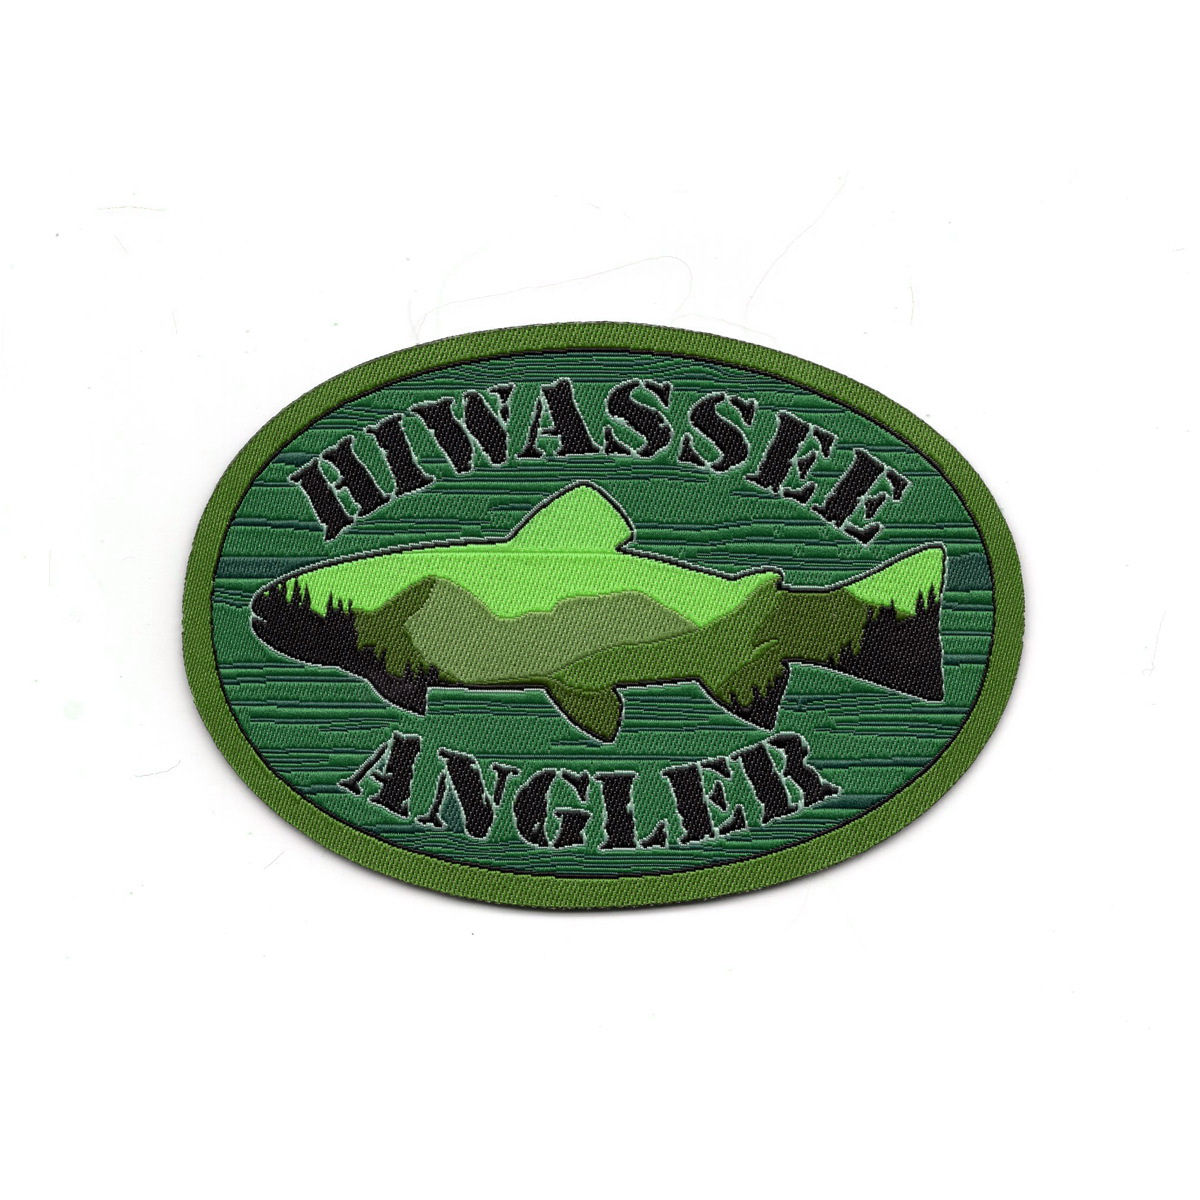 hiwassee angler patch